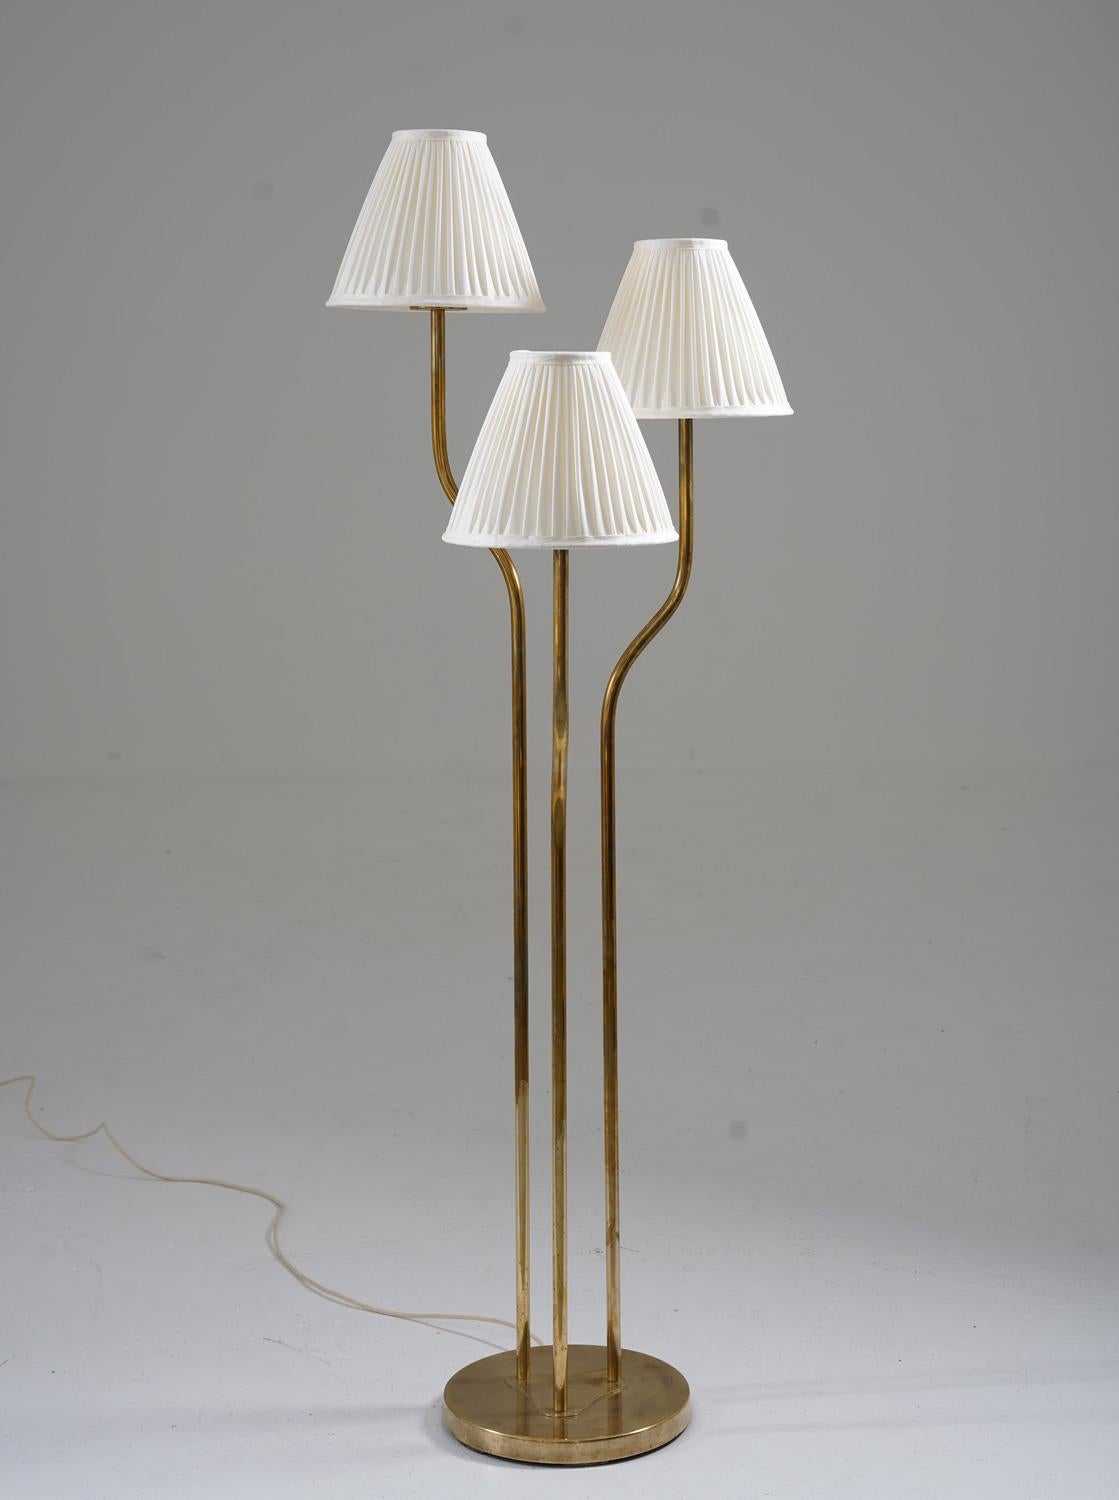 Rare floor lamp manufactured in Sweden, 1940s. 
This floor lamp consists of a beautiful brass base, holding three brass rods, one for each light source. The bulbs are hidden by new custom-made hand-pleated chintz fabric shades

Condition: Very